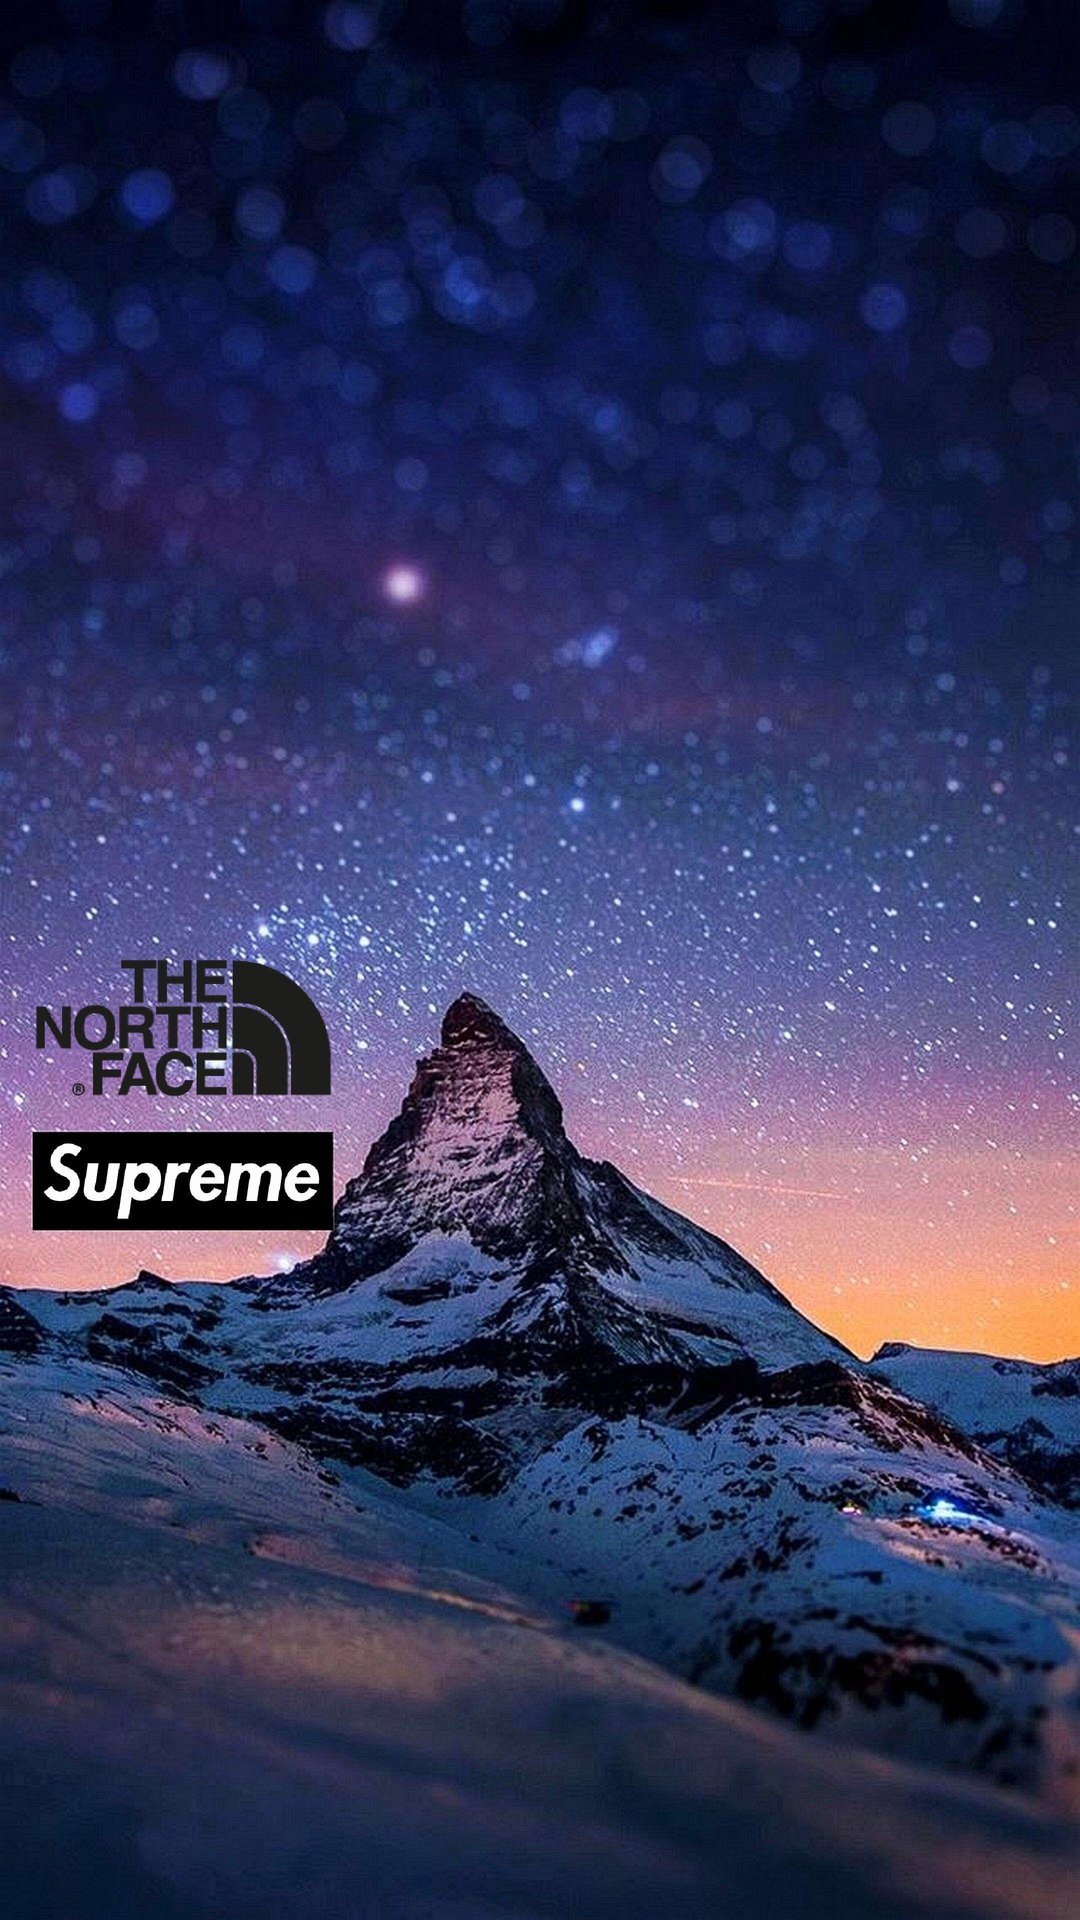 Supreme Iphone Wallpapers